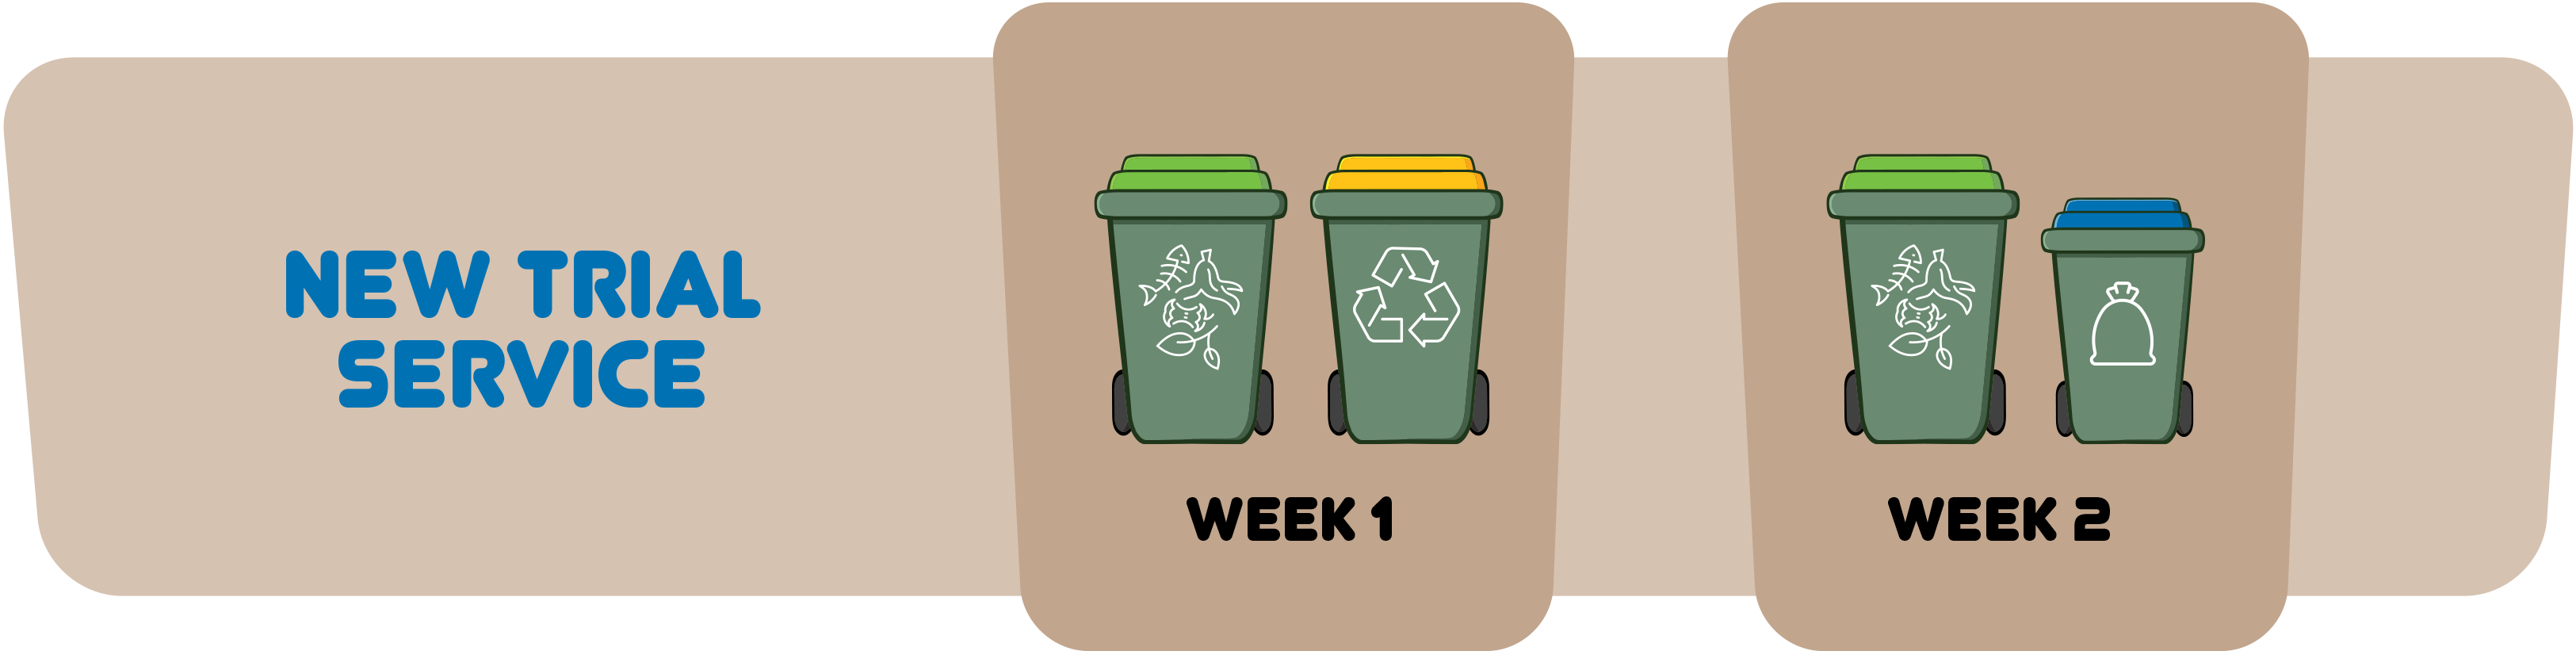 New trial service for kerbside bin collection. Week 1 recycling and FOGO. Week 2 landfill and FOGO.